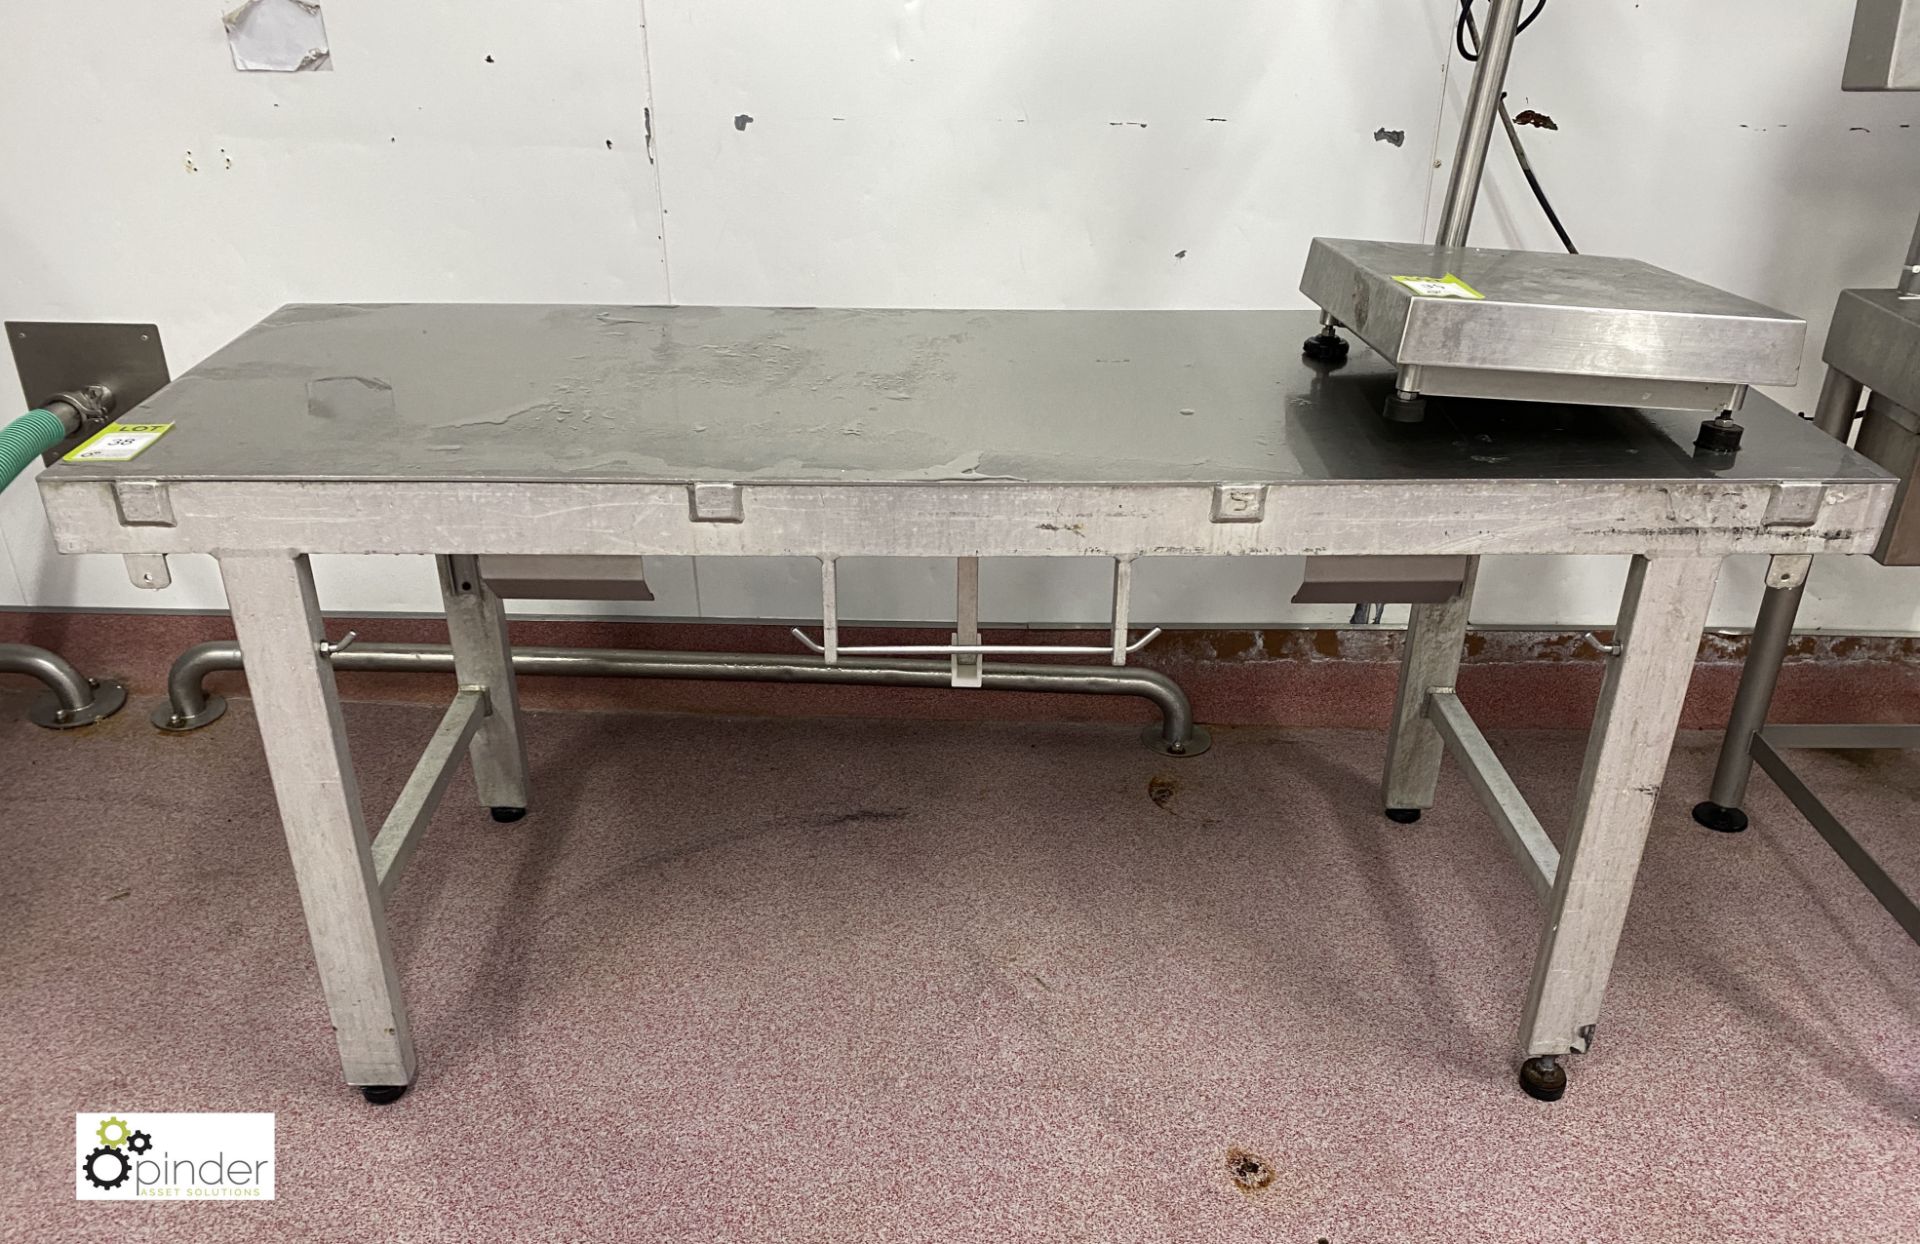 Stainless steel Preparation Table, 1820mm x 660mm x 820mm high (please note there is a lift out